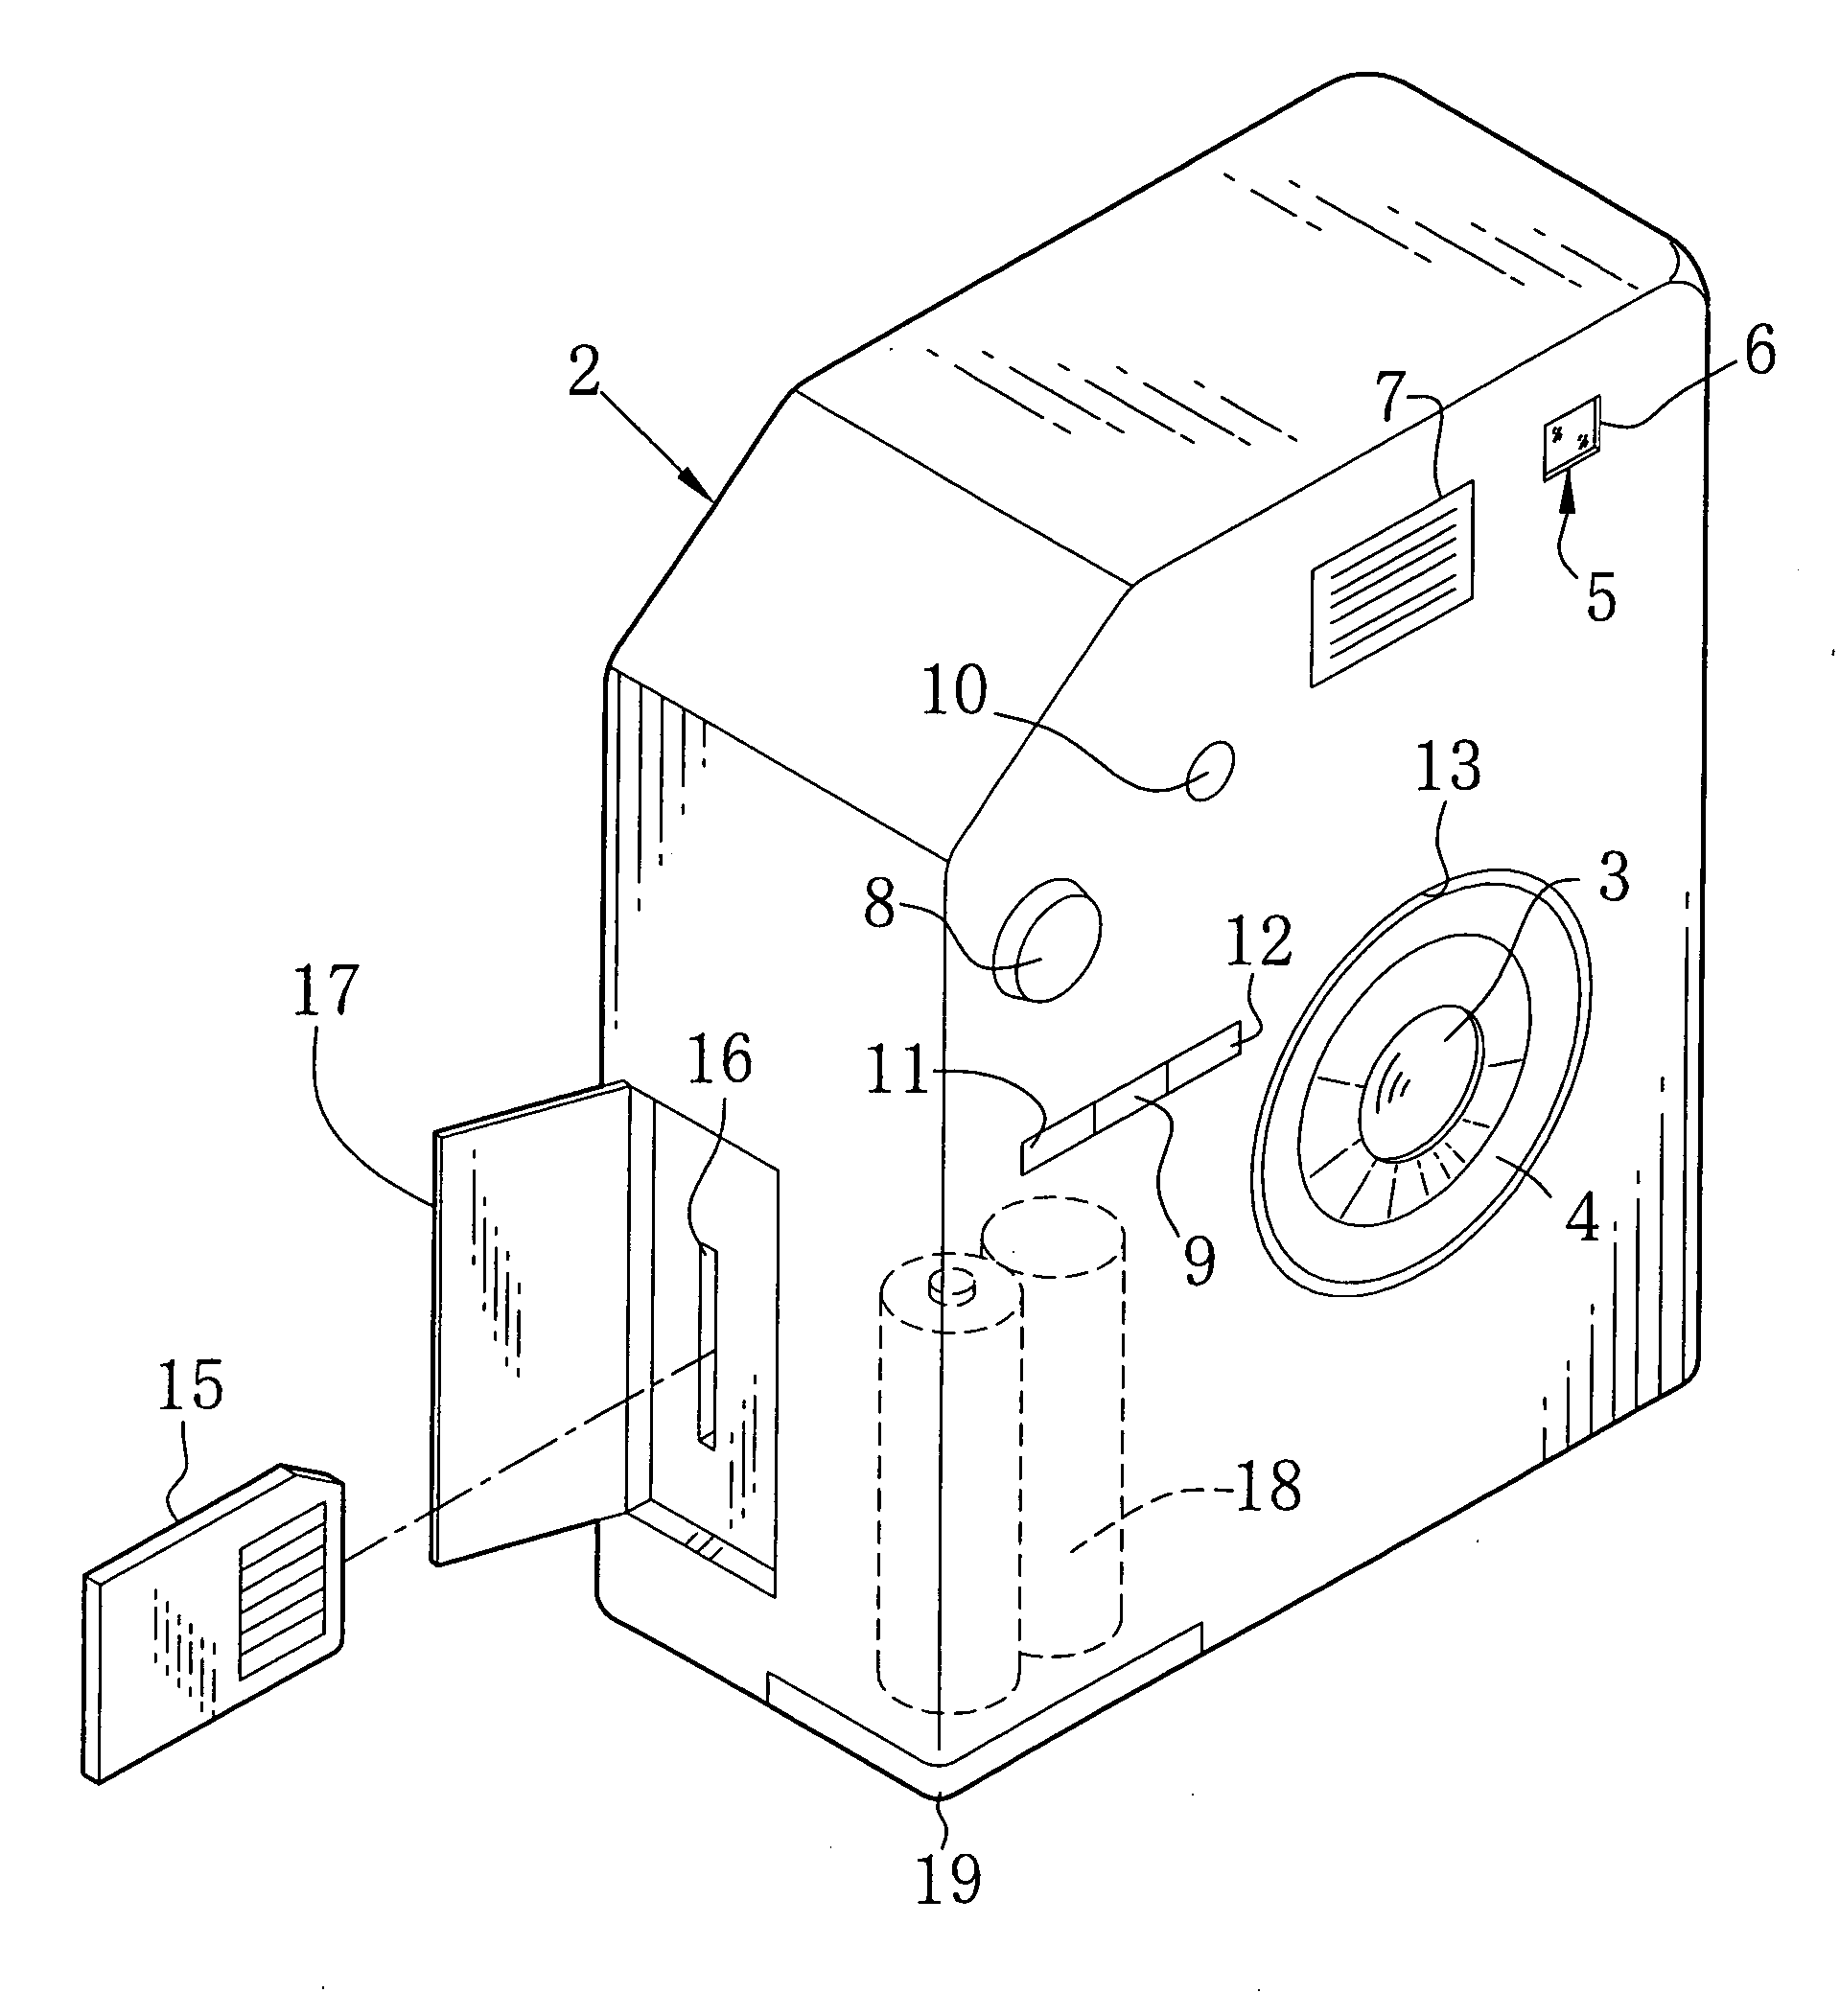 Digital camera with changeable operation sequence